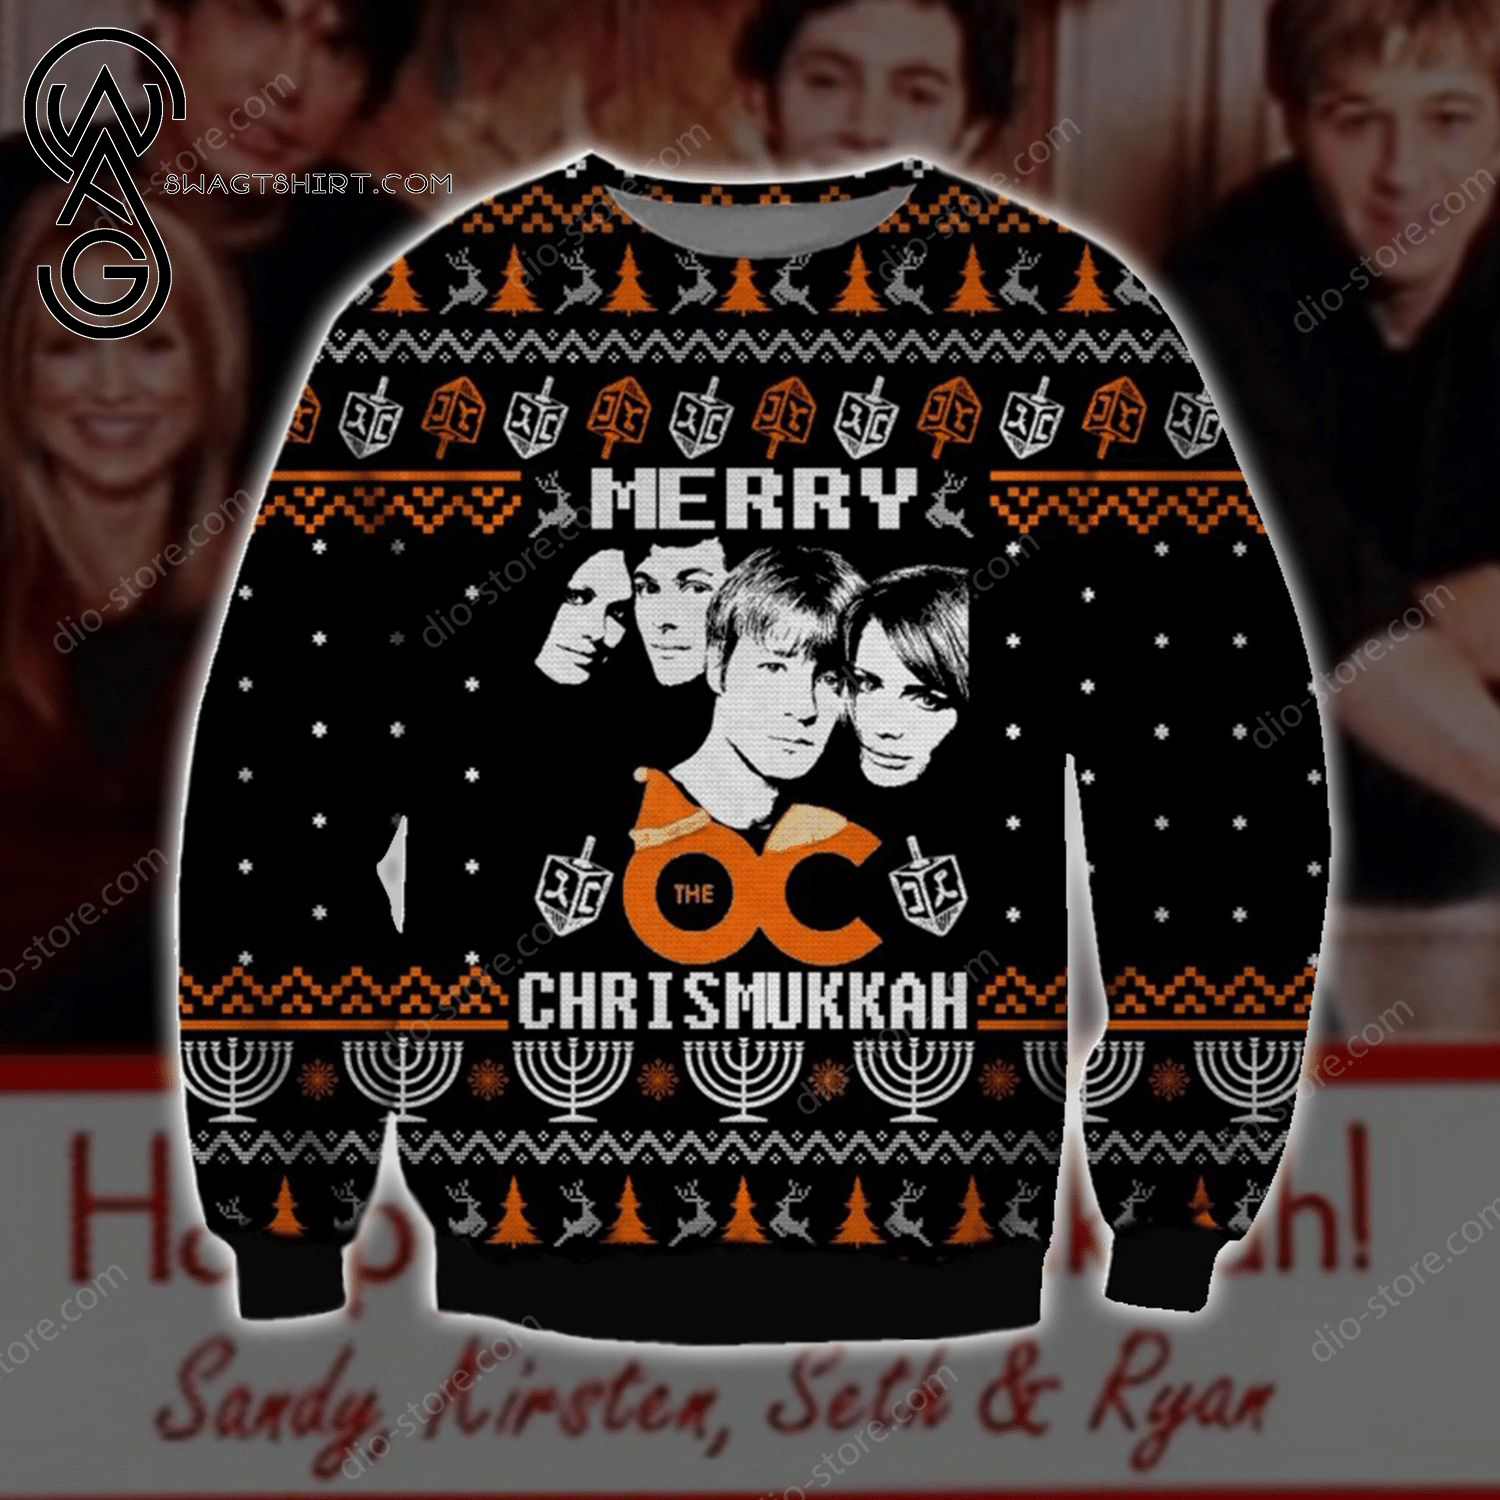 The Best Chrismukkah Ever Full Print Ugly Christmas Sweater